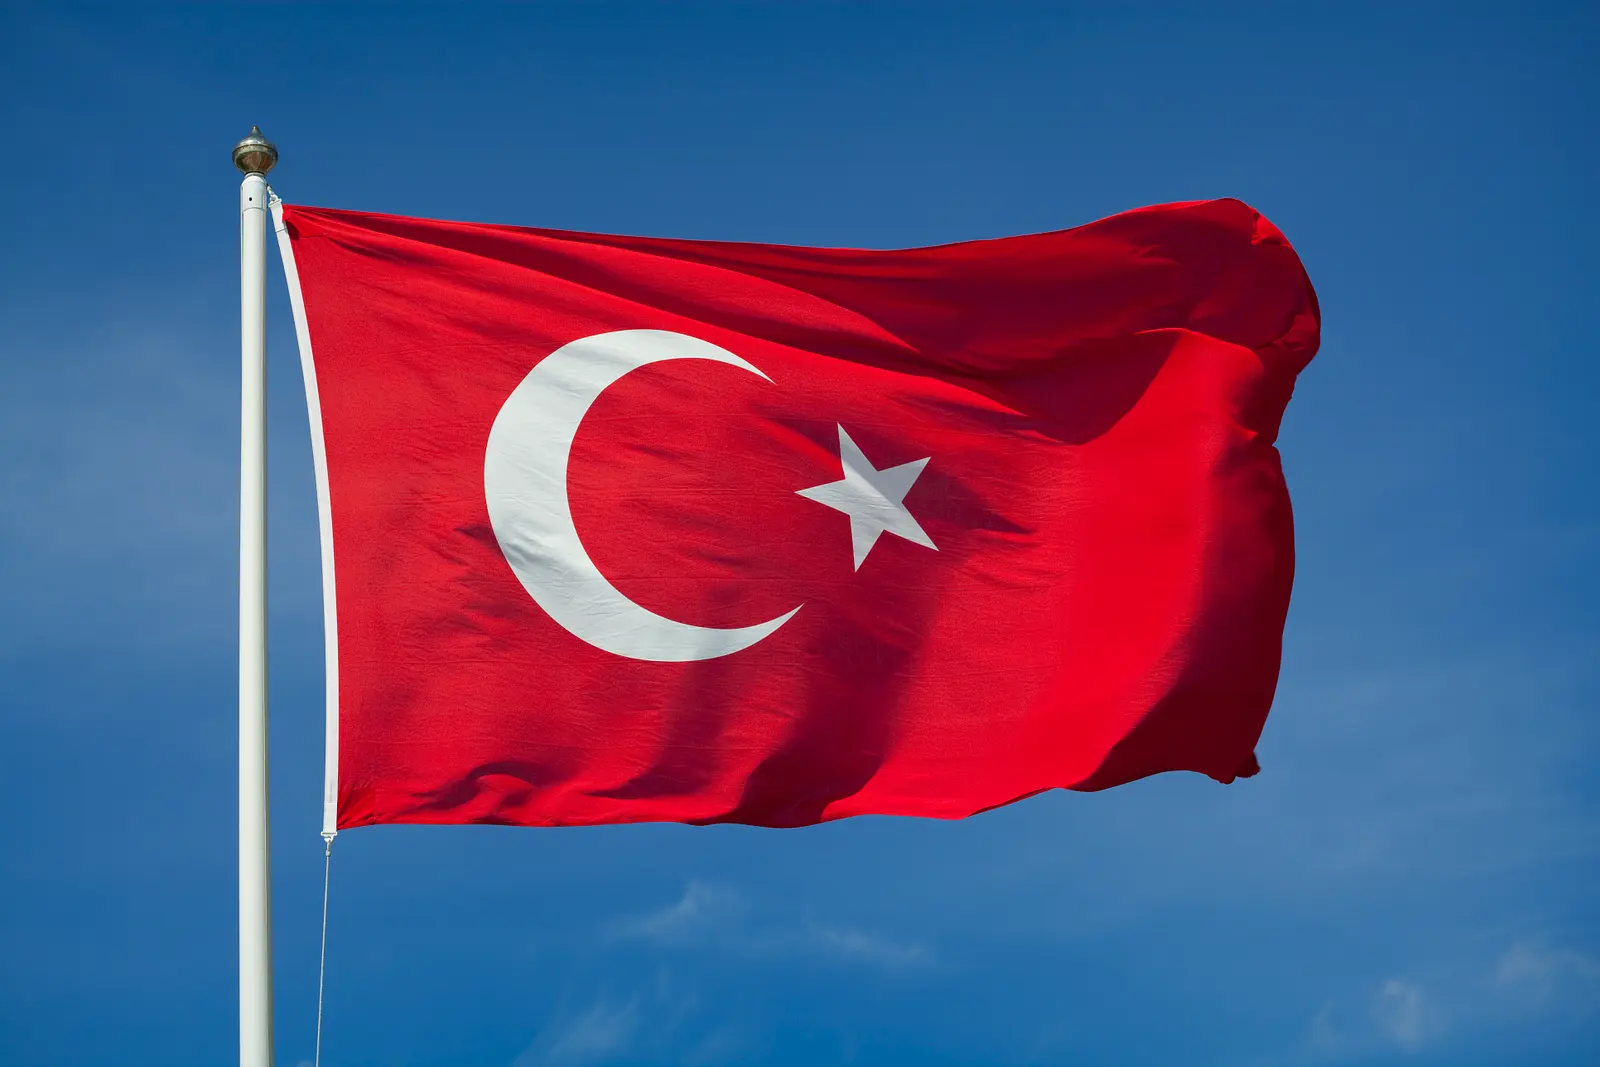 Google and the Recognition of "Türkiye" Over "Turkey"